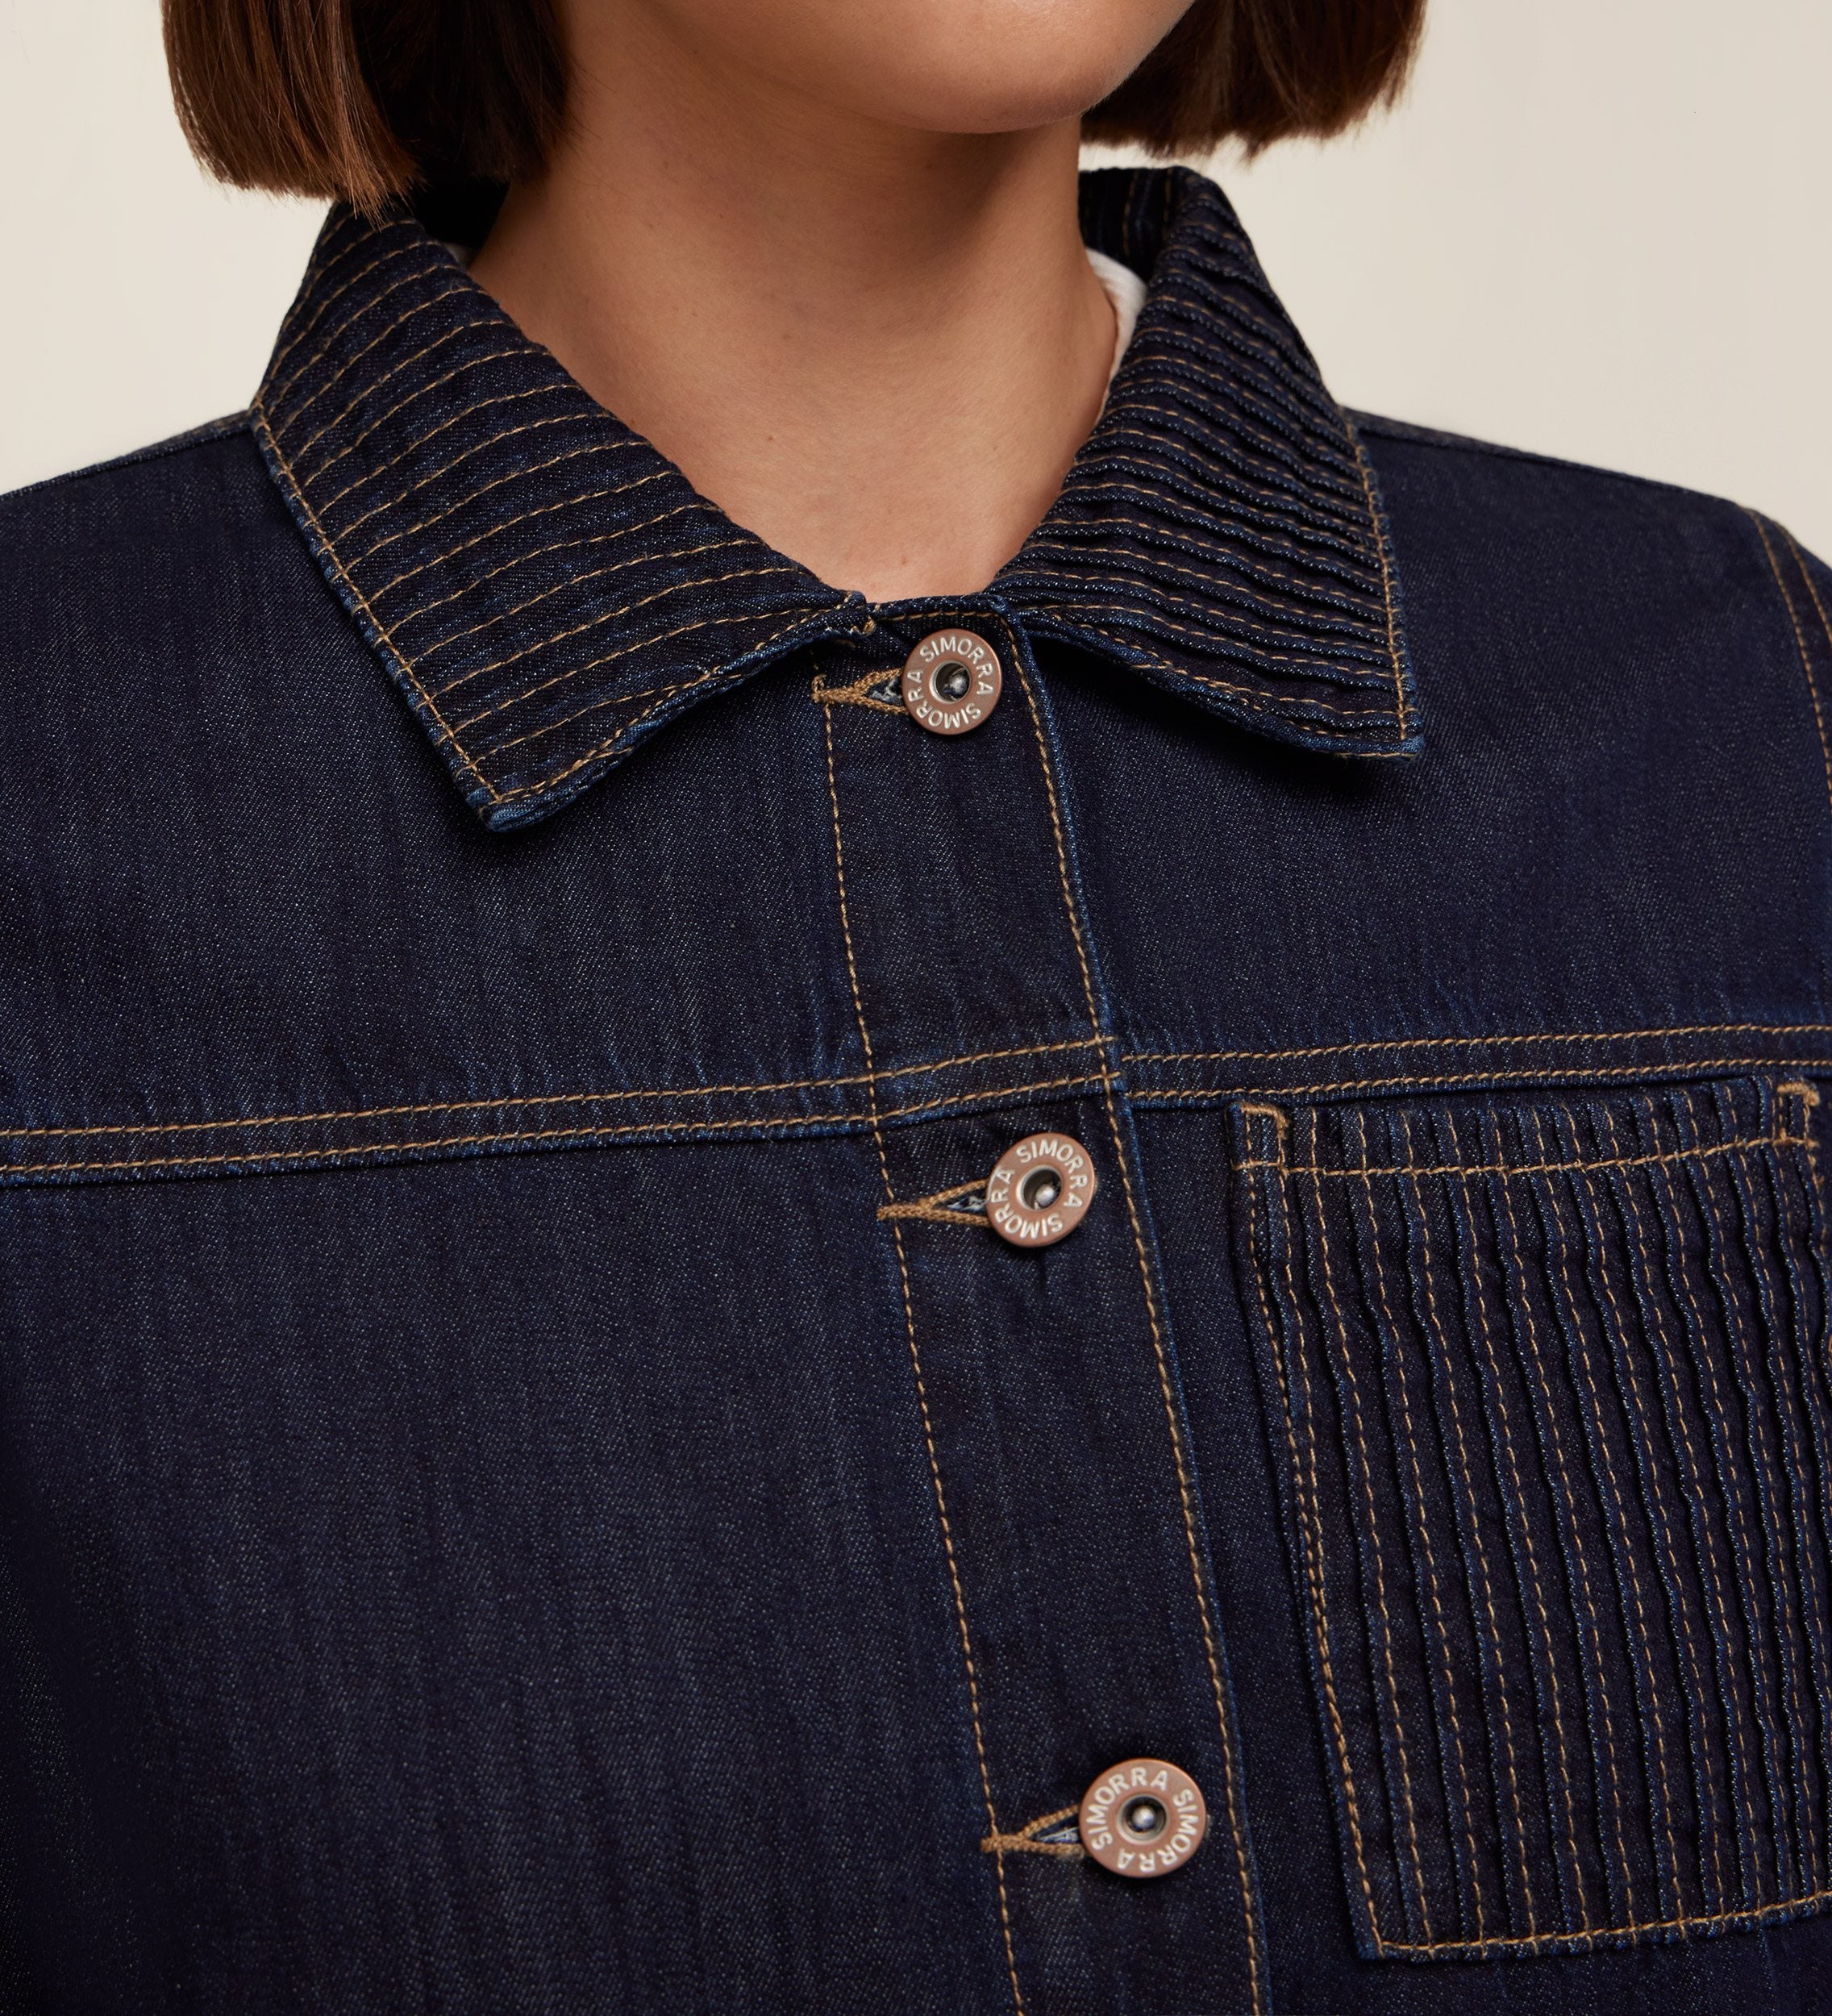 Drawstring overshirt with contrast stitching